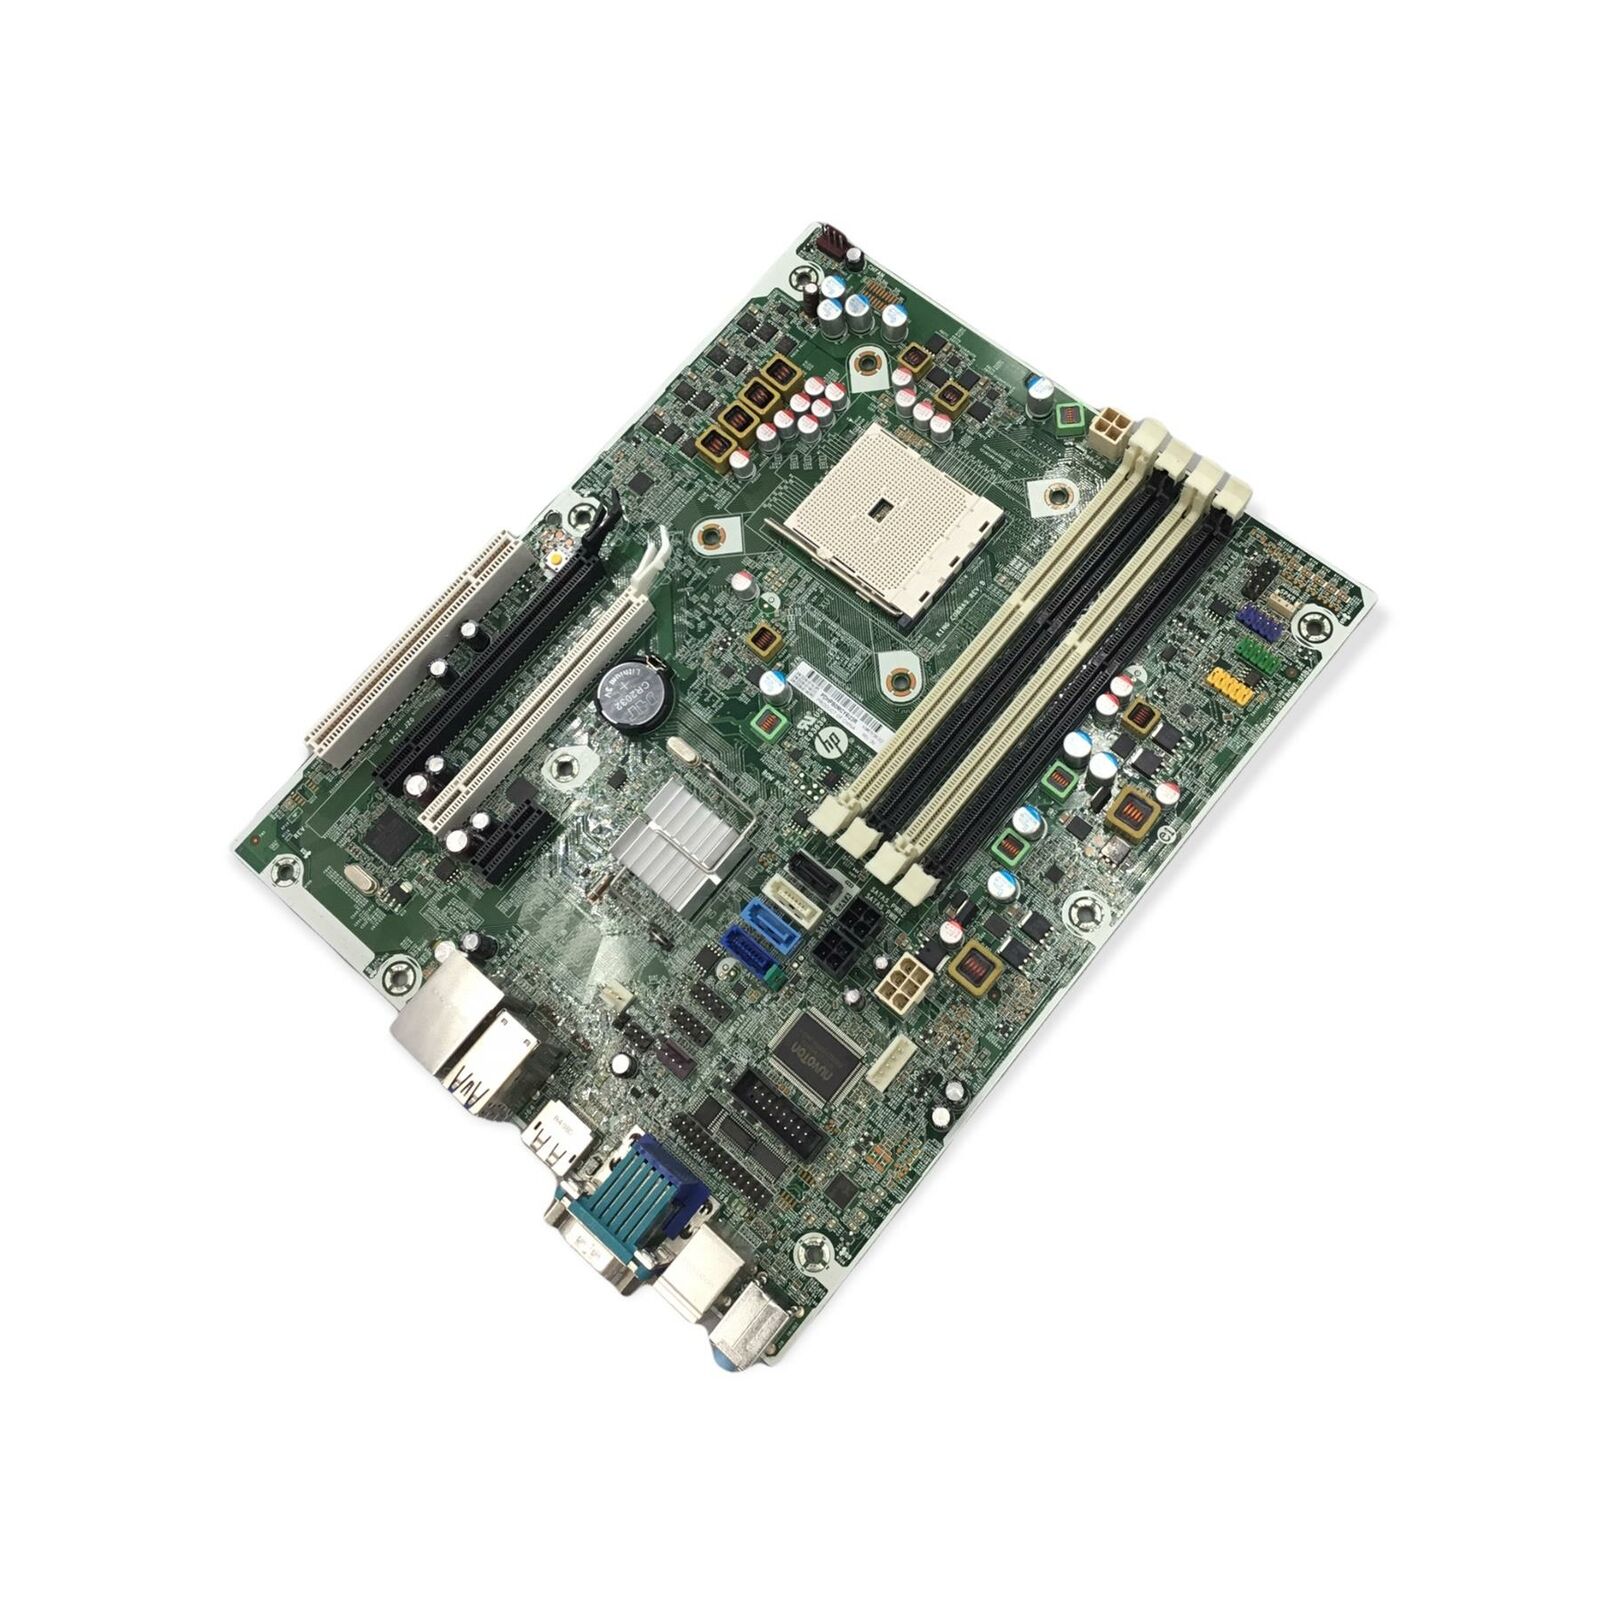 HP Pro 6305 SFF motherboard 715183-001 676196-002